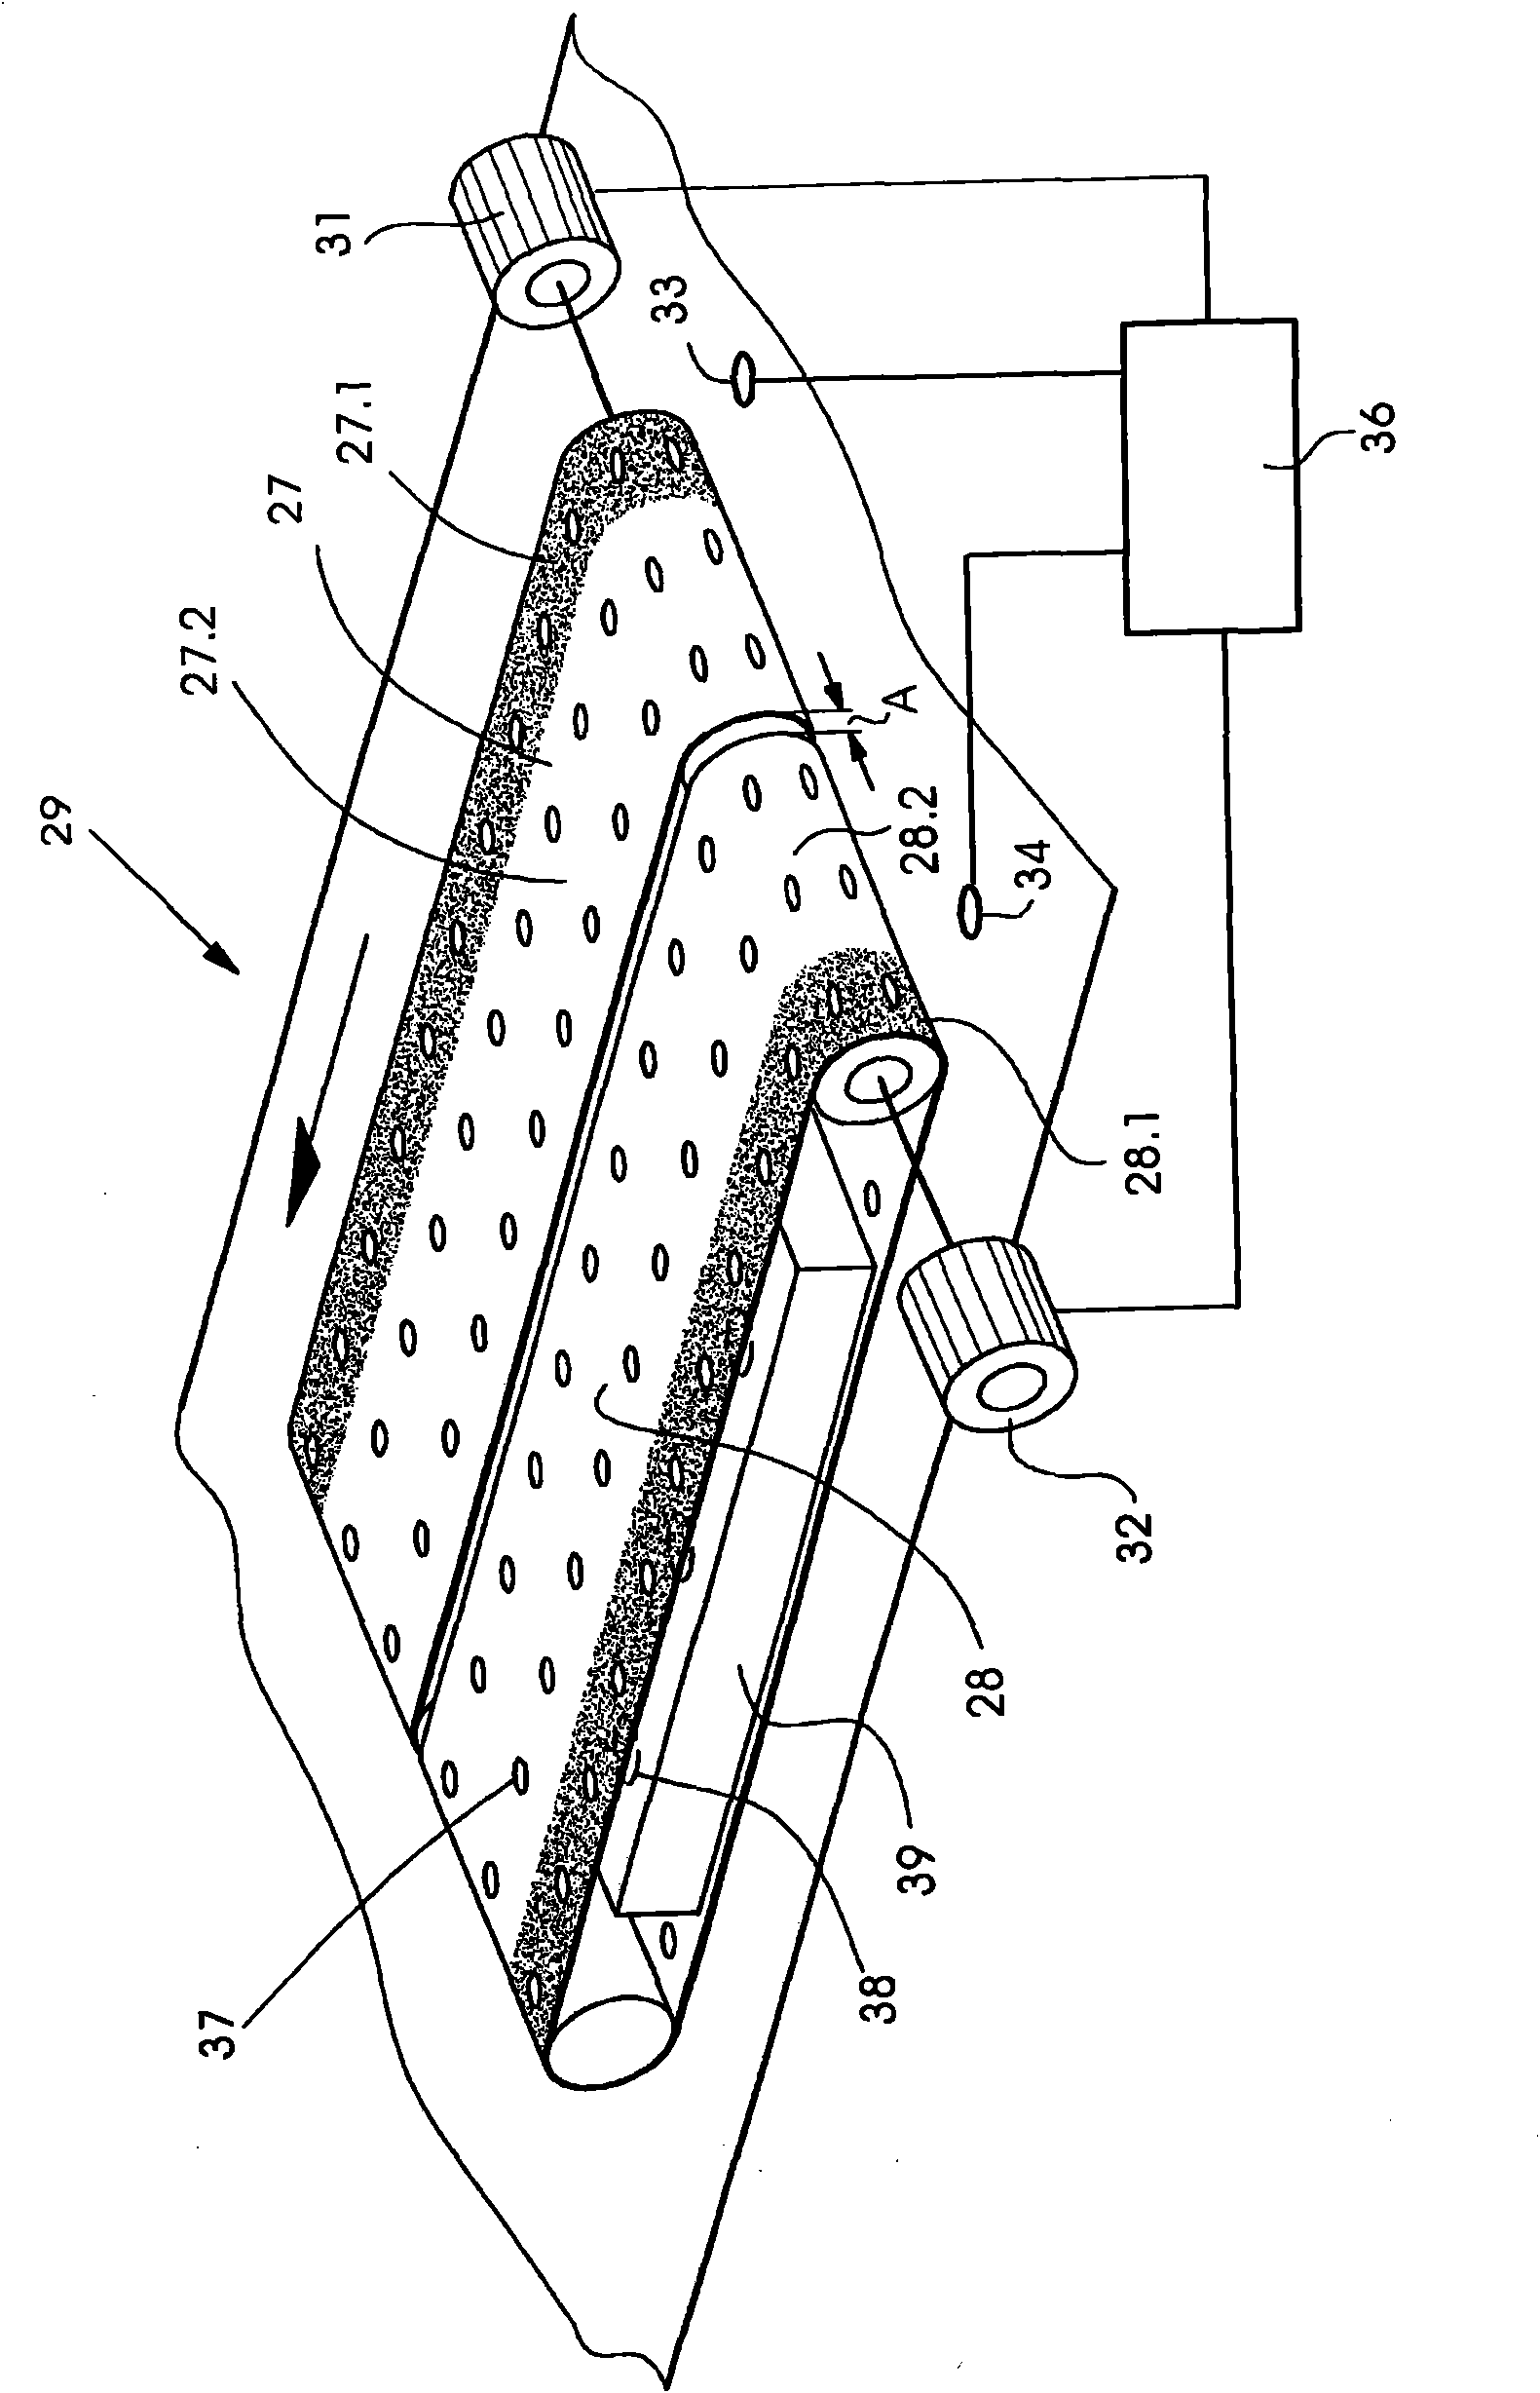 Apparatus for feeding and aligning sheets fed to a processing machine, in particular a printing machine